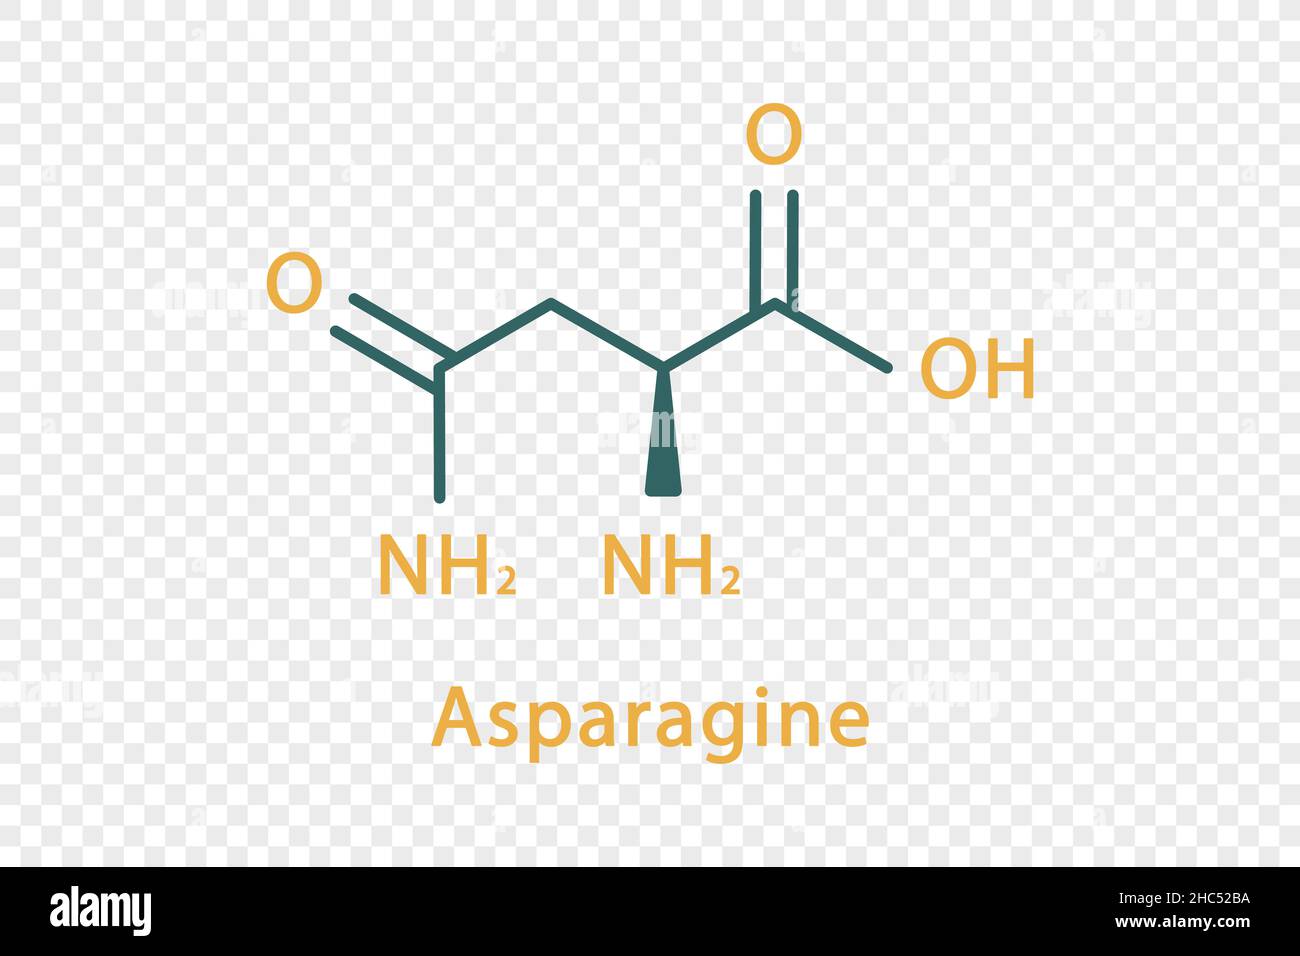 Asparagine chemical formula. Asparagine structural chemical formula isolated on transparent background. Stock Vector